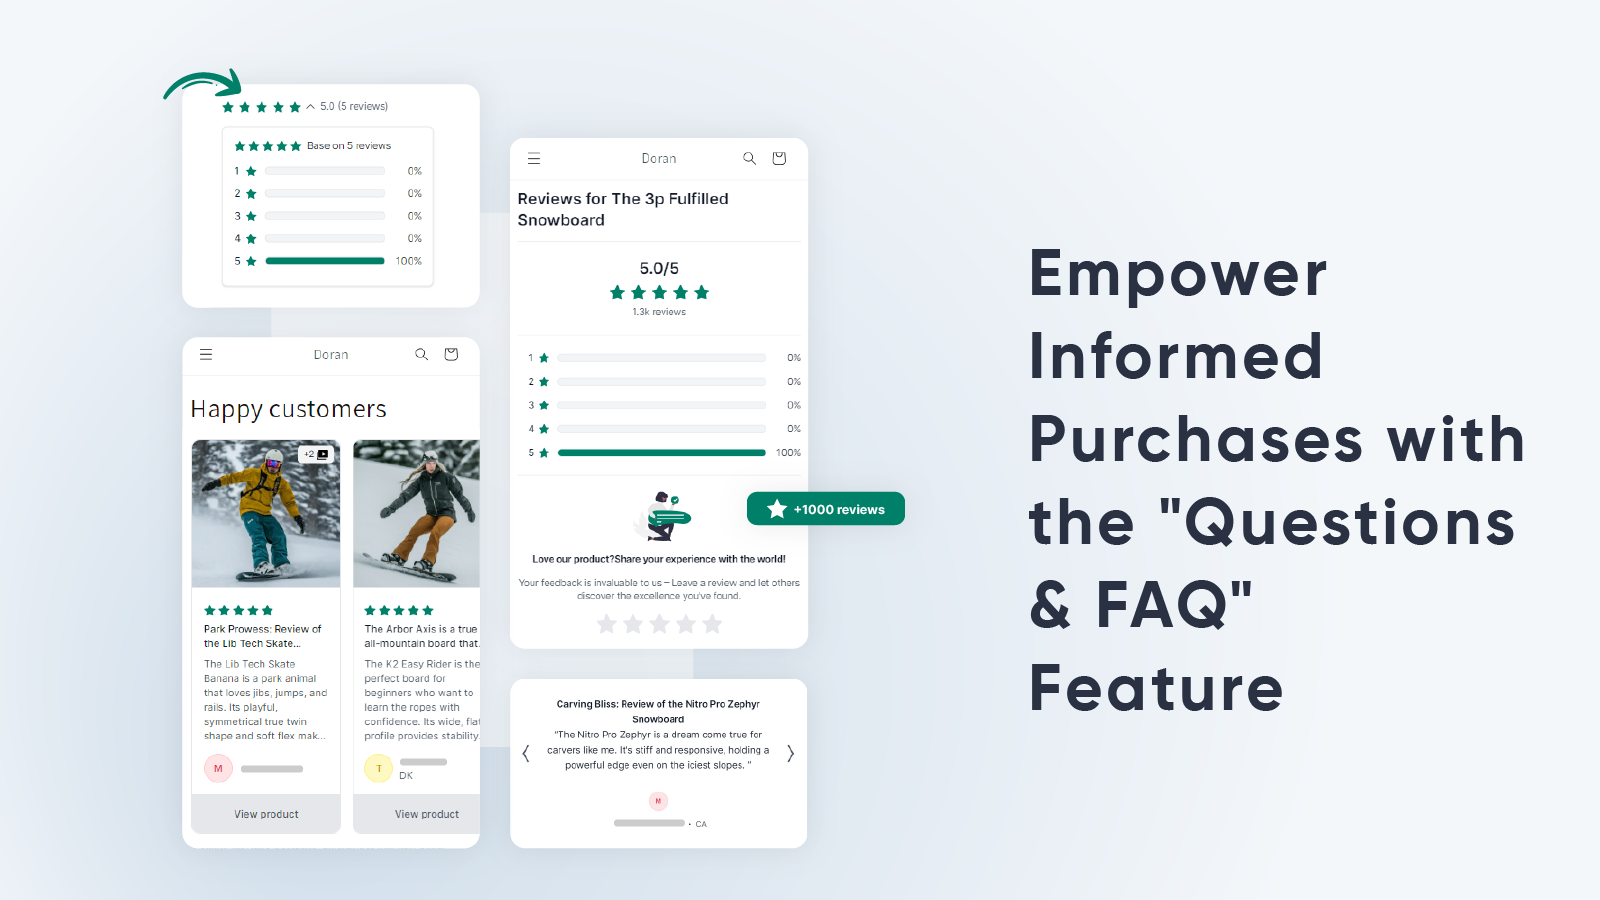 Empower Informed Purchases with the "Questions & FAQ" Feature